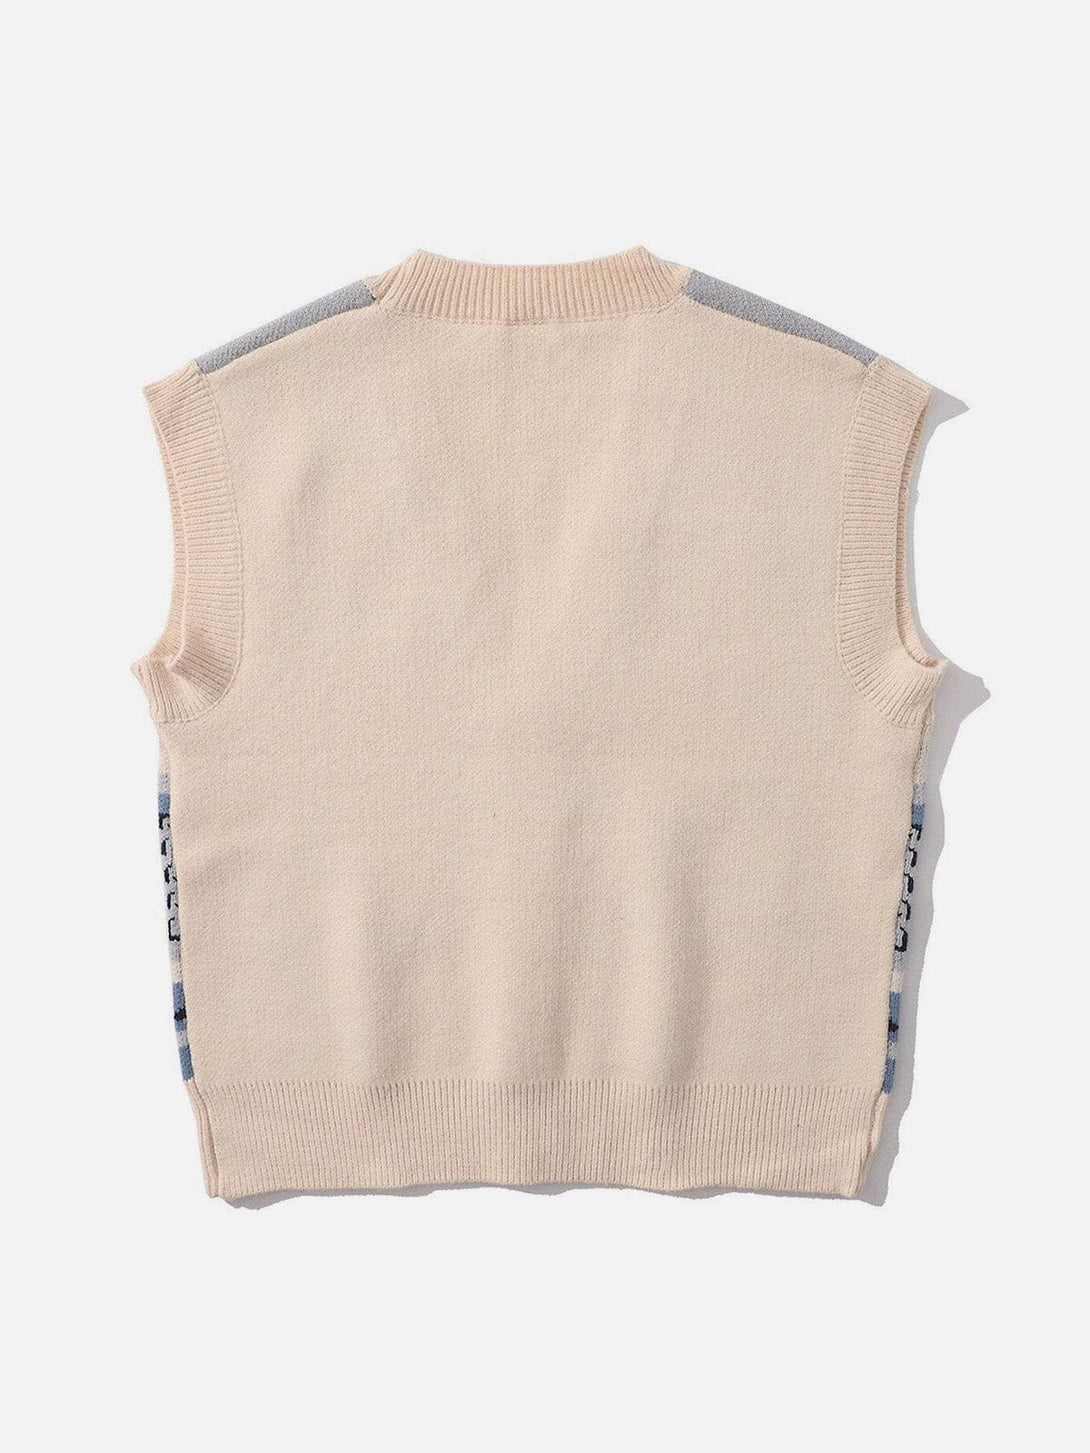 Levefly - Hand In Hand Pattern Knit Sweater Vest - Streetwear Fashion - levefly.com